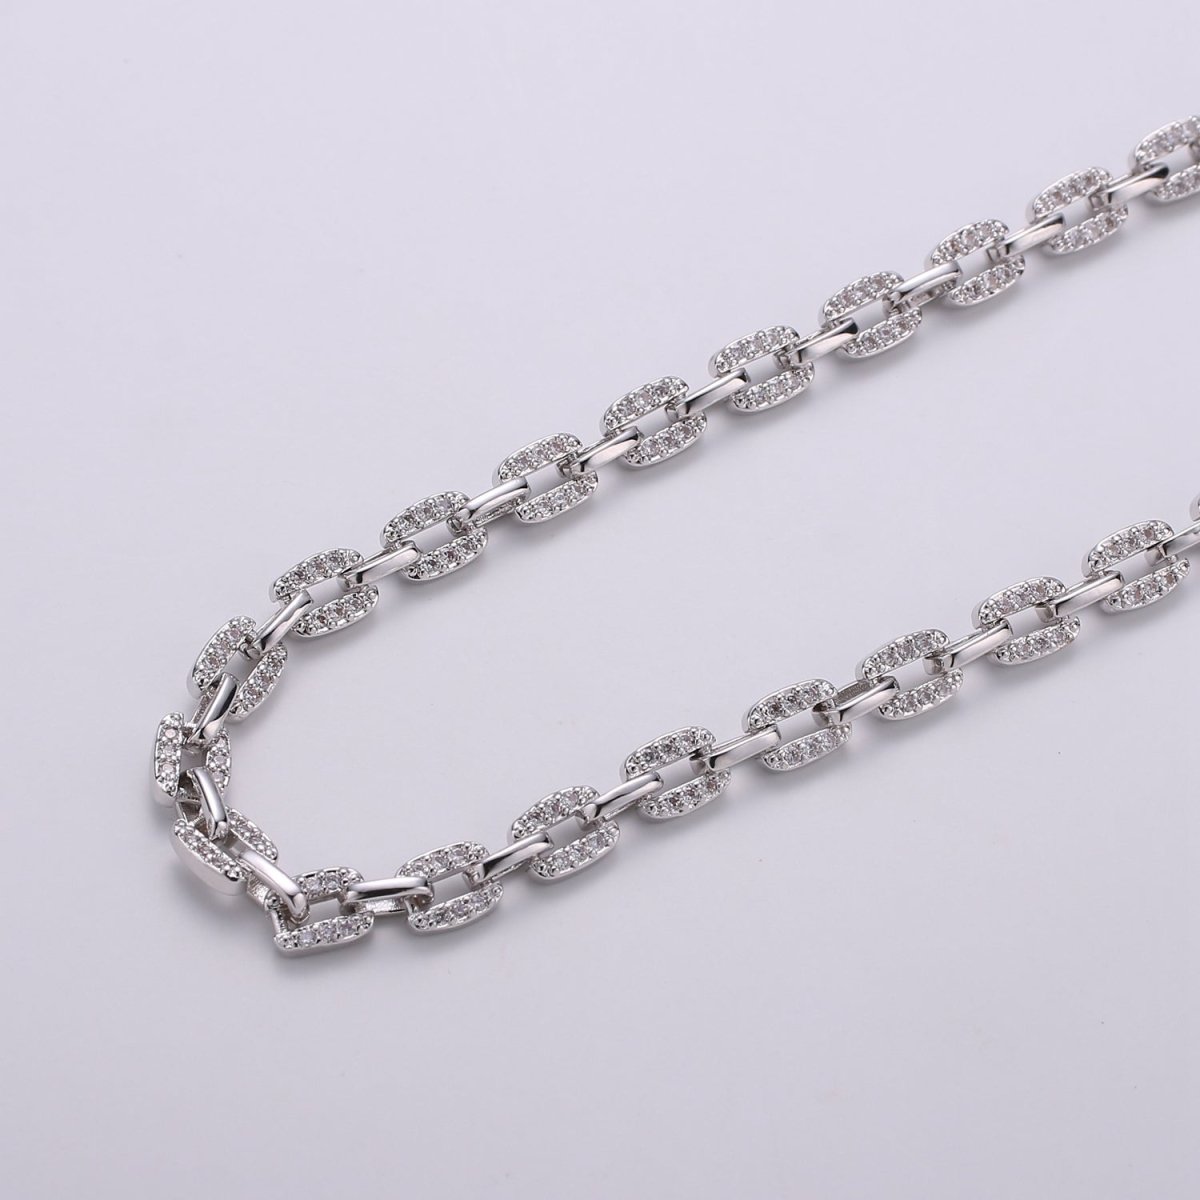 Silver Micro Pave Chain CZ Rolo Chain Specialty Link Cable Chain by Meter Bold Clear Cubic Chain Chunky Chain Size 6x6mm | ROLL-290 O-065 Clearance Pricing - DLUXCA